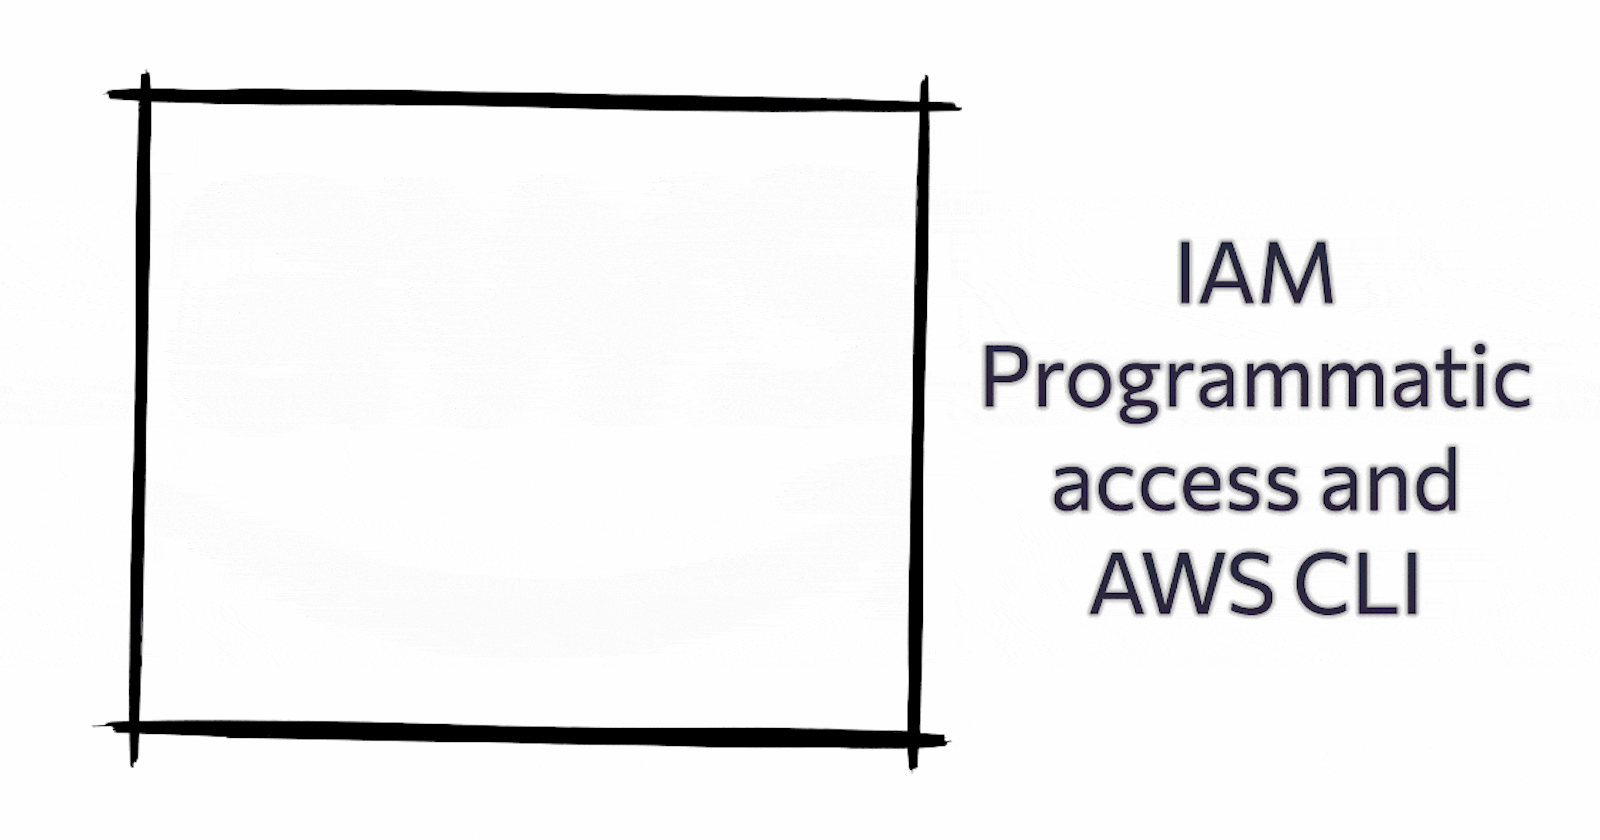 IAM and AWS CLI: A Guide to Accessing AWS Services from the Command Line : Day 42 of 90 Days of DevOps